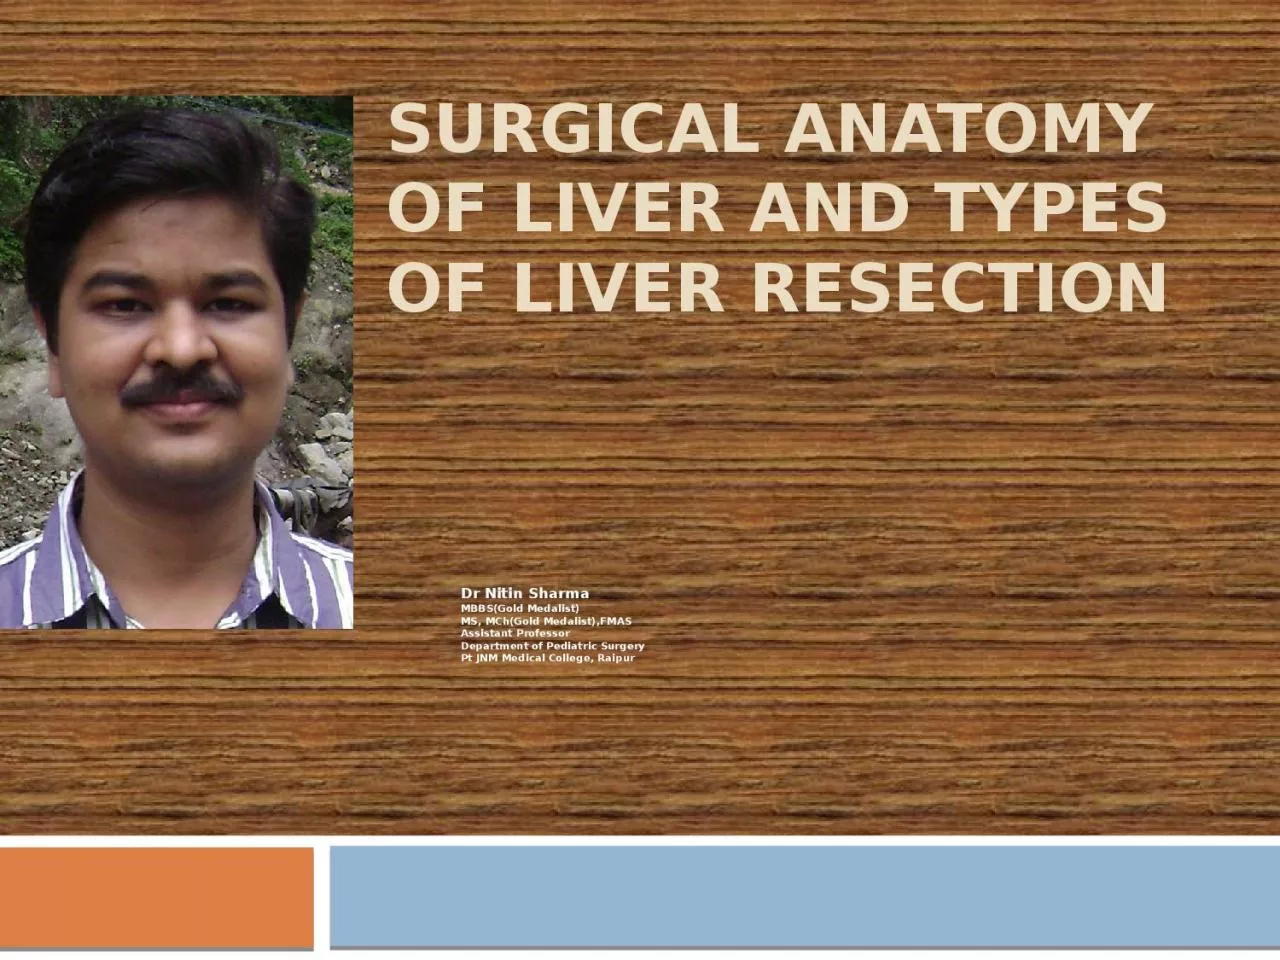 Surgical anatomy of liver and types of liver resection